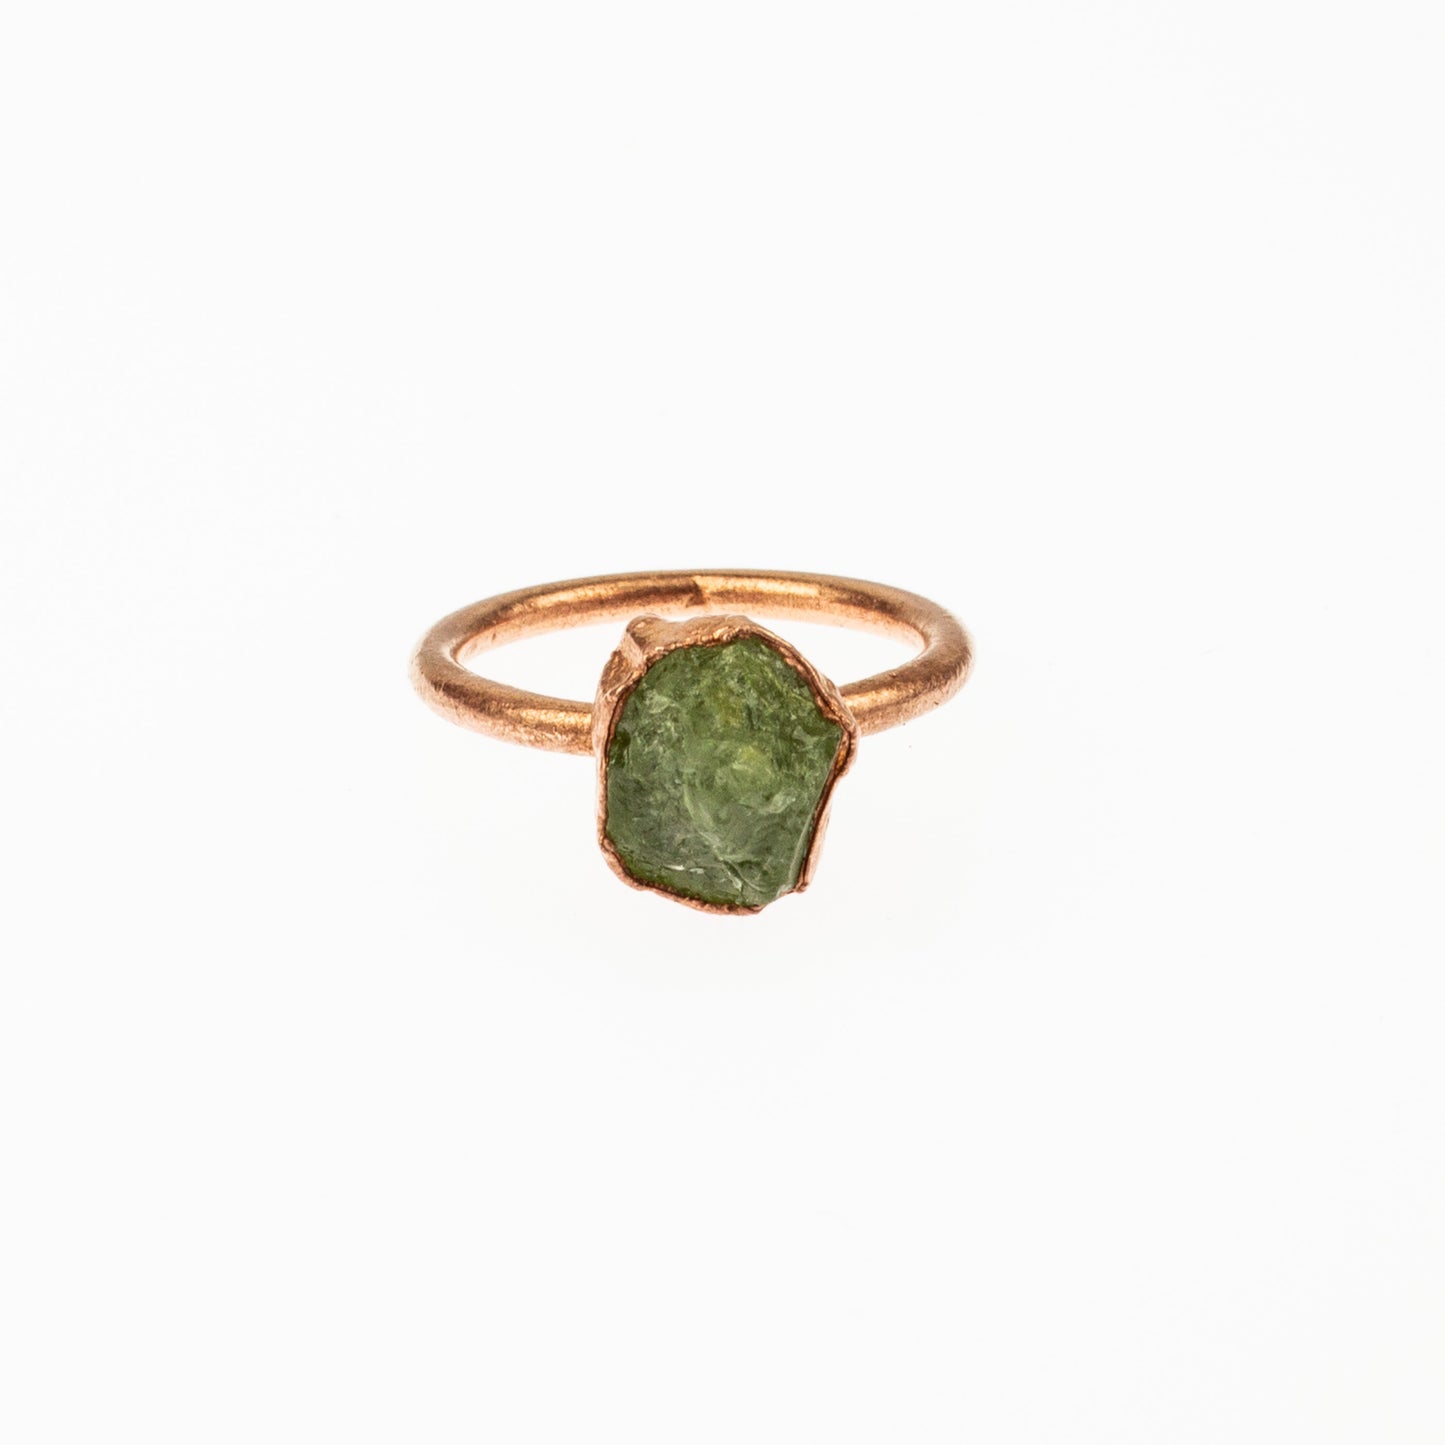 Small Green Garnet Solitaire Ring (January Birthstone)